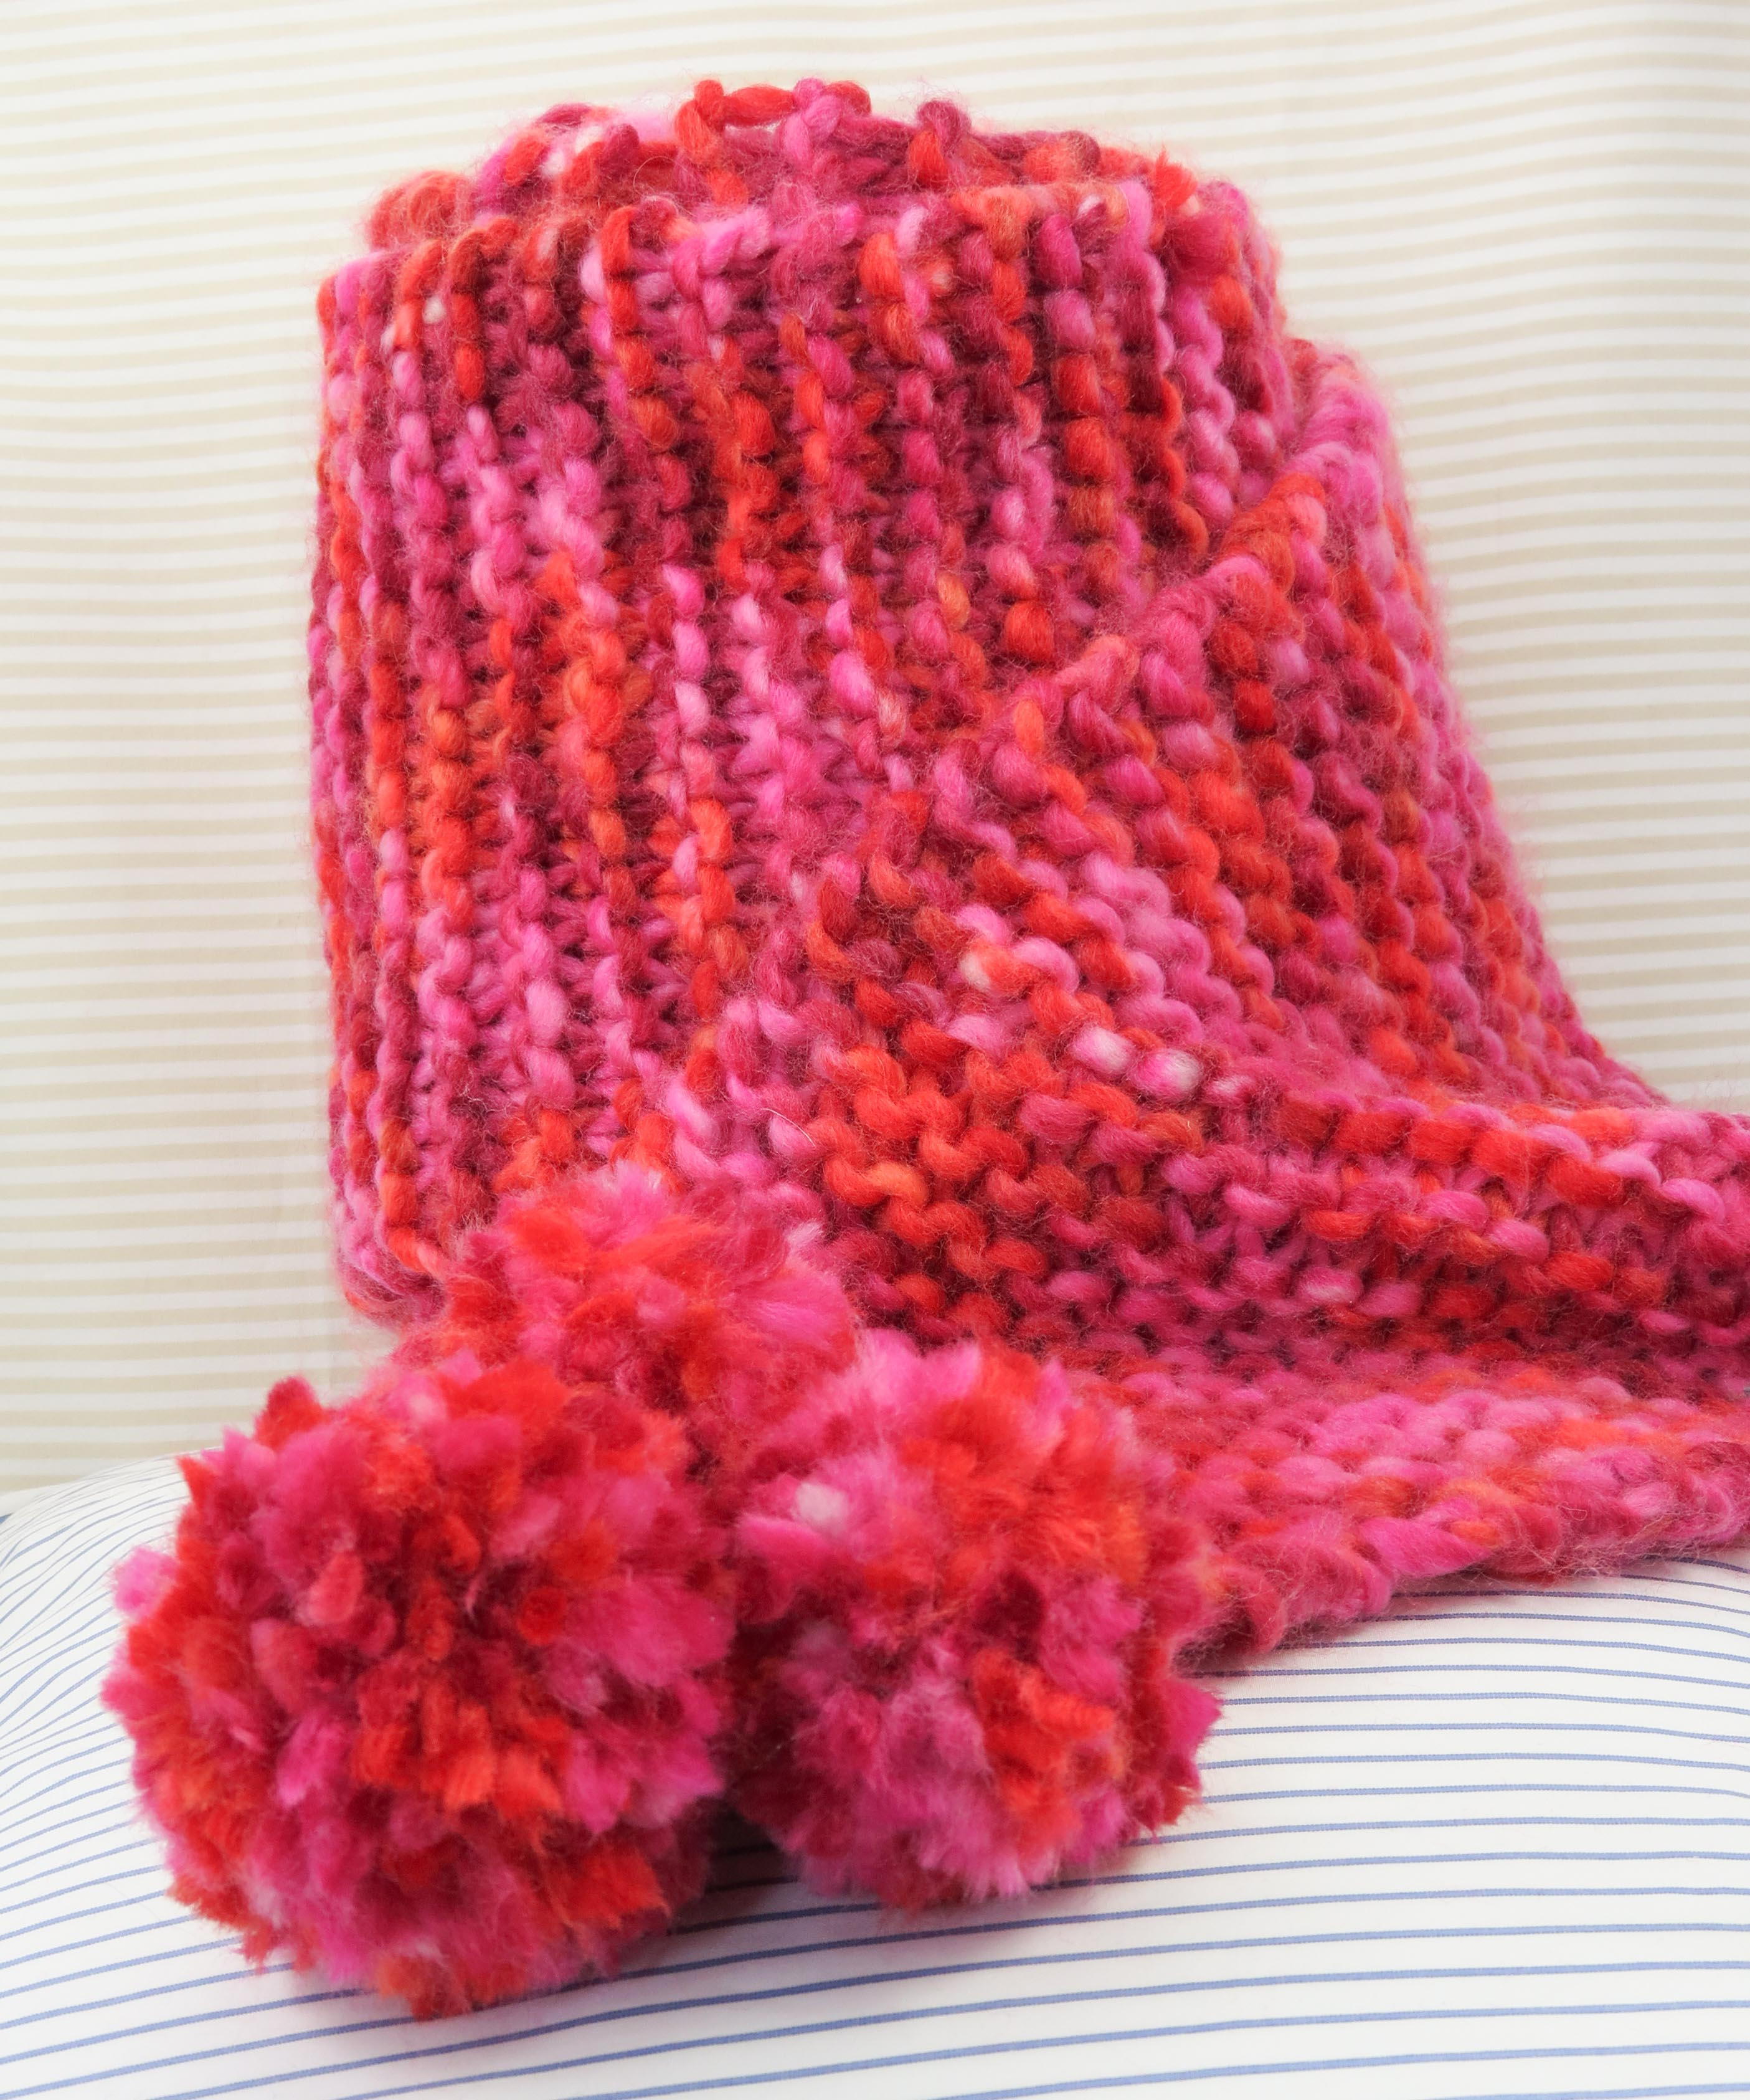 Free Knitting Patterns For Beginners Uk Knit A Fabulous Pompom Scarf Easy Pattern To Download Buttonbag